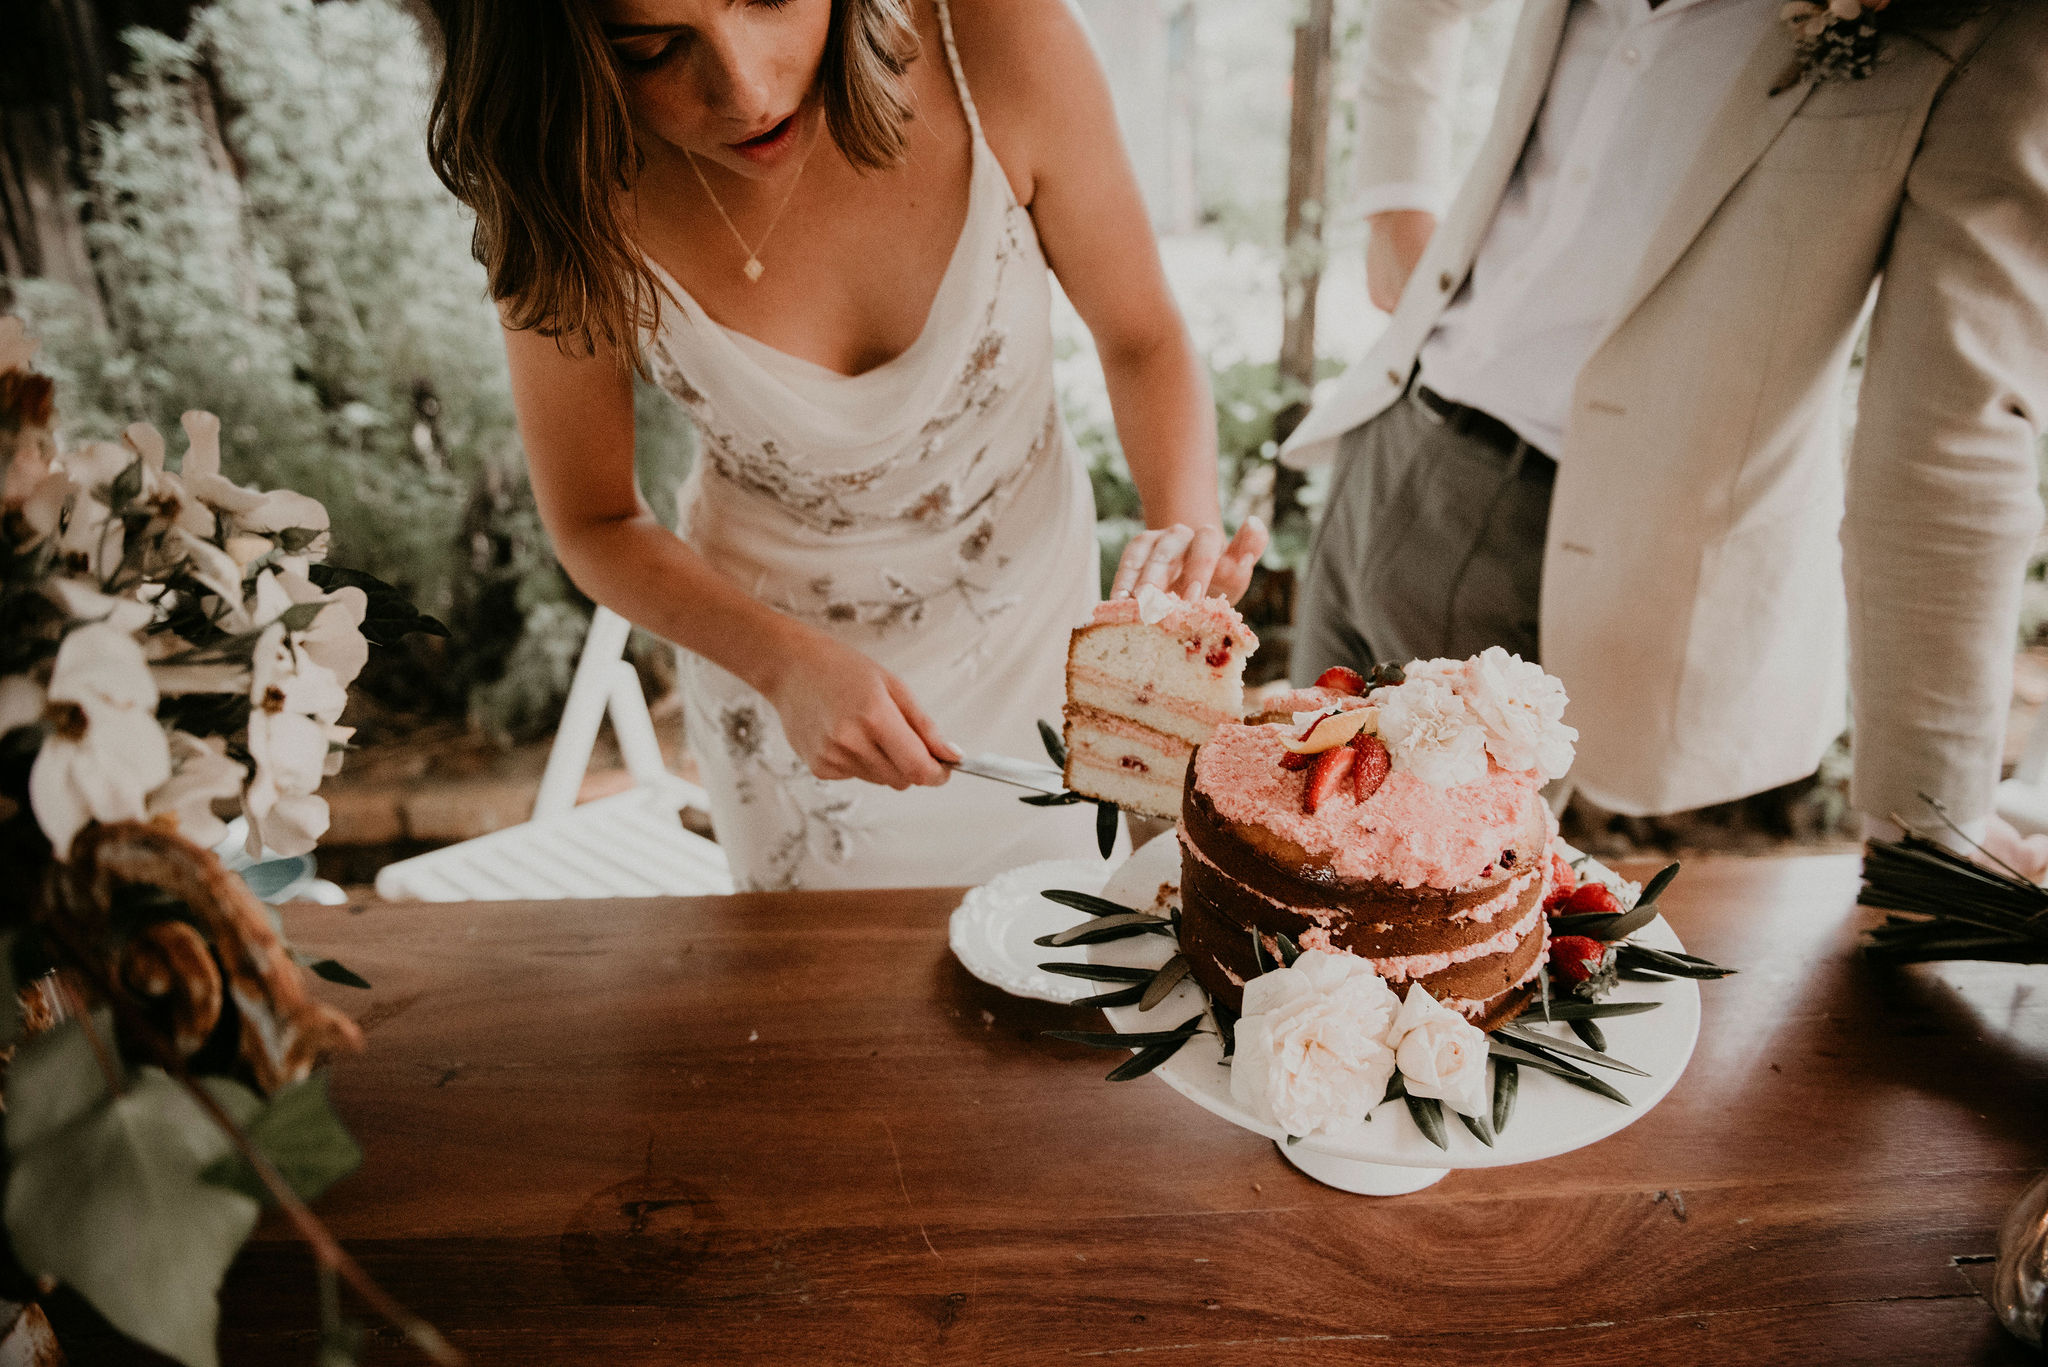 Let's Elope Melbourne's Elopement Packages - simple yet elegant ceremony which can be personalised and beautiful photography you will cherish forever